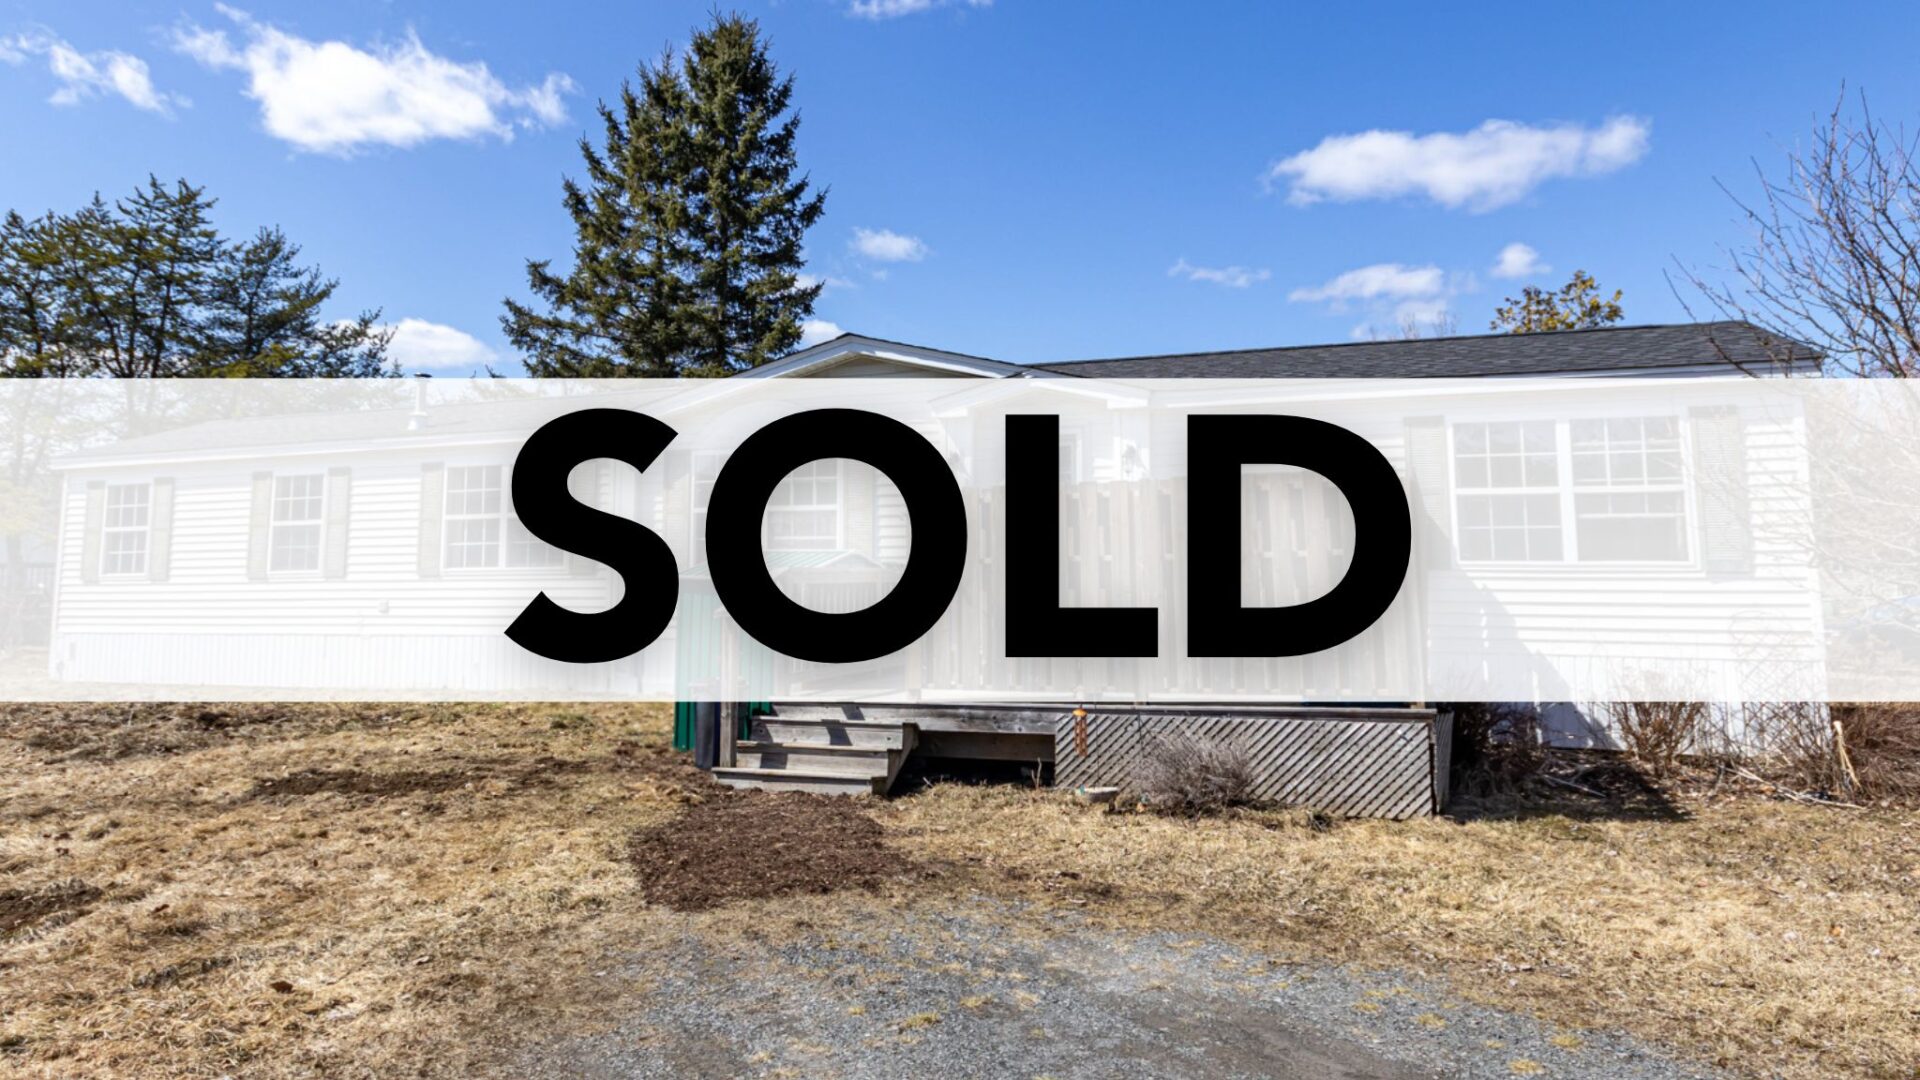 2 Northup Crescent Sold